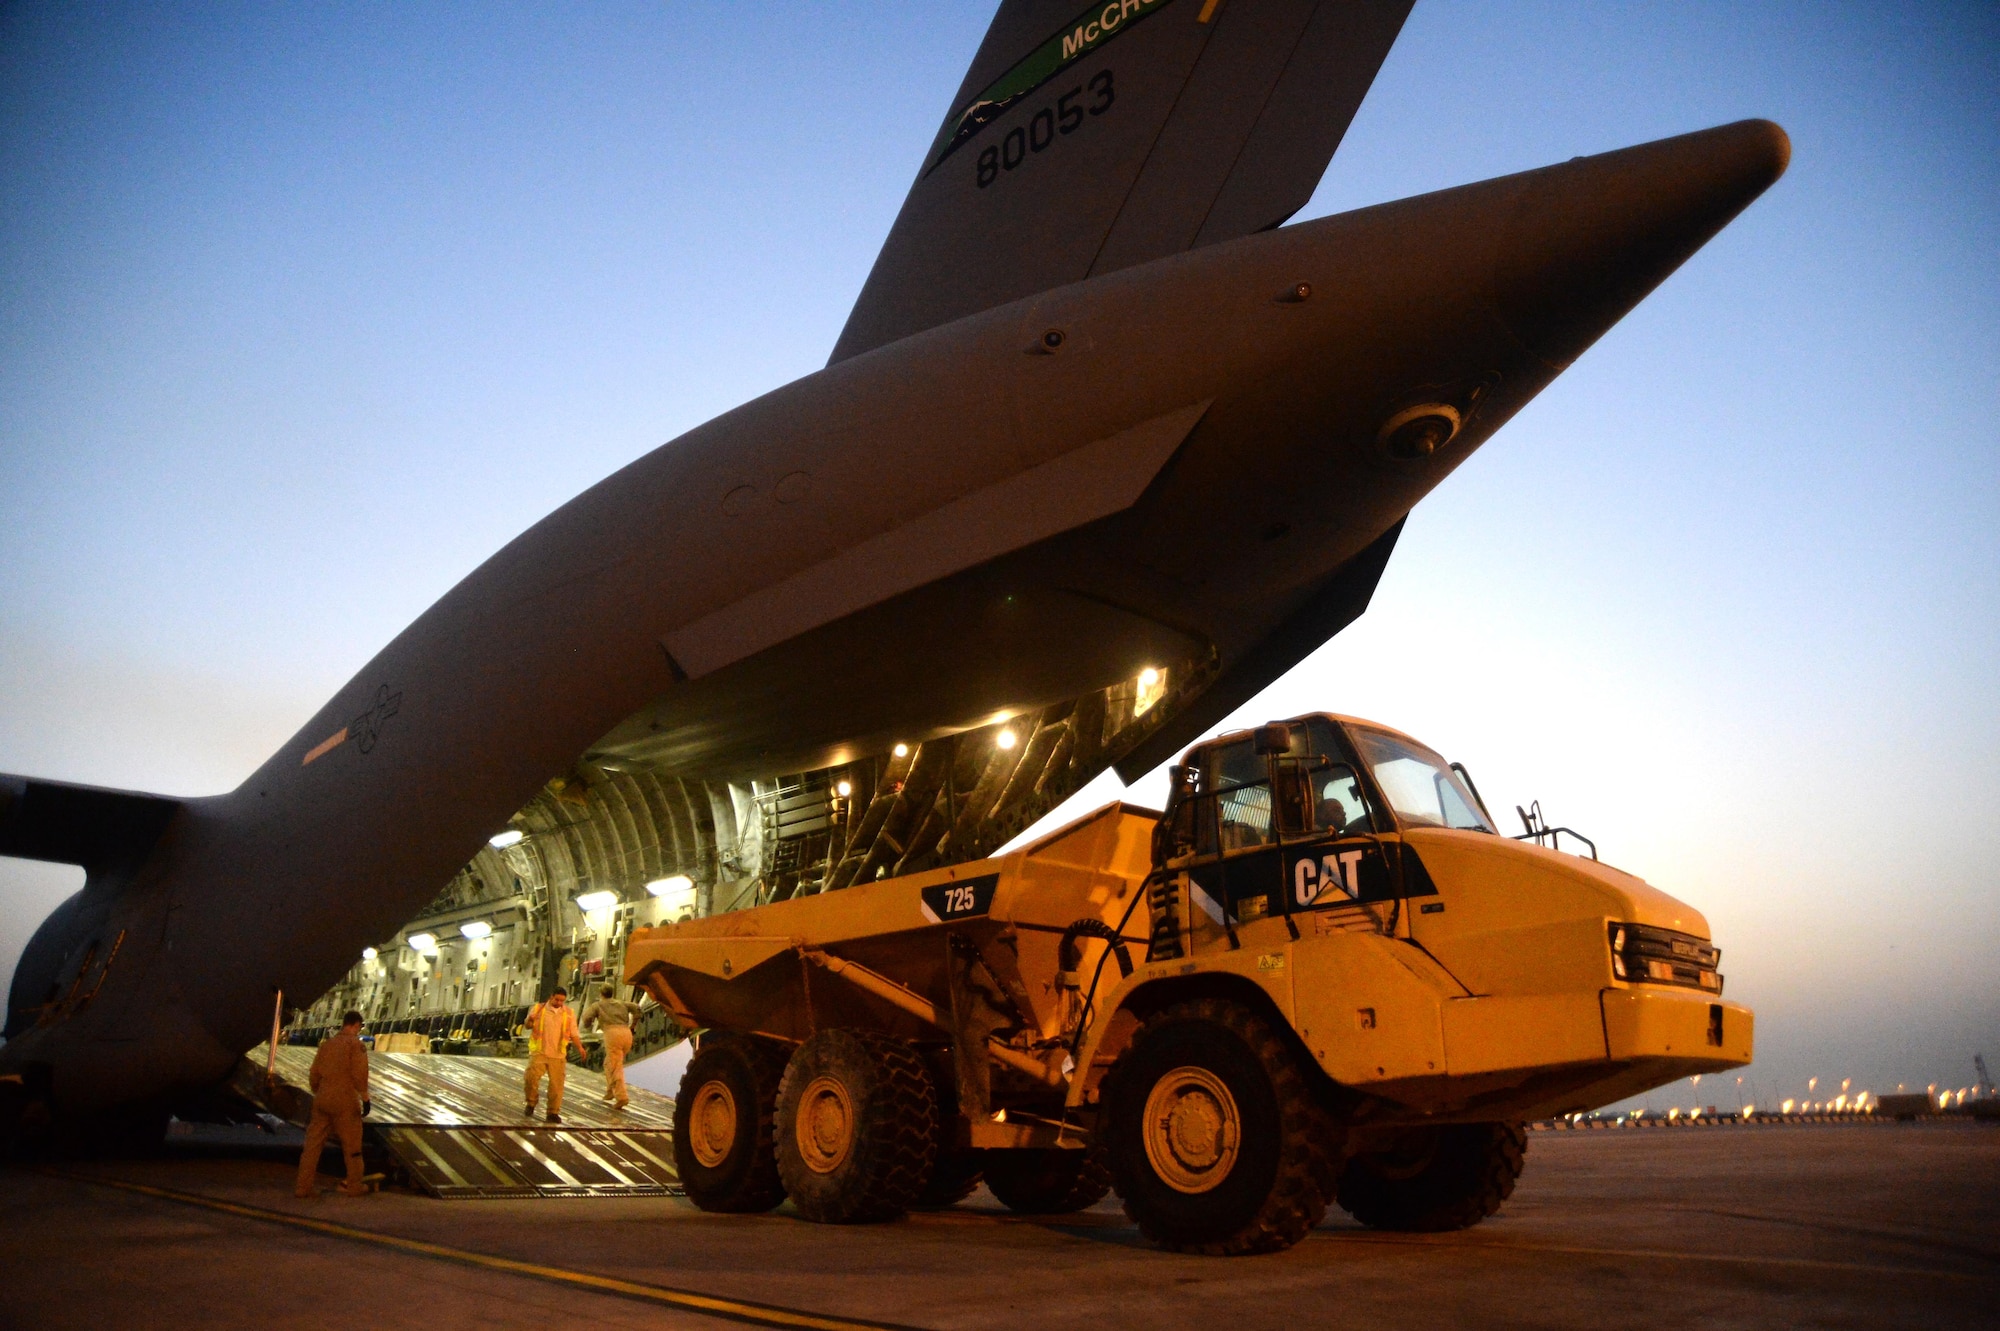 U.S. Air Force members unload a heavy operations vehicle from a C-17 Globemaster III in support of Operation Inherent Resolve in Kuwait, August 14, 2015. OIR is the military intervention against Daesh. (U.S. Air Force photo by Staff Sgt. Sandra Welch)   